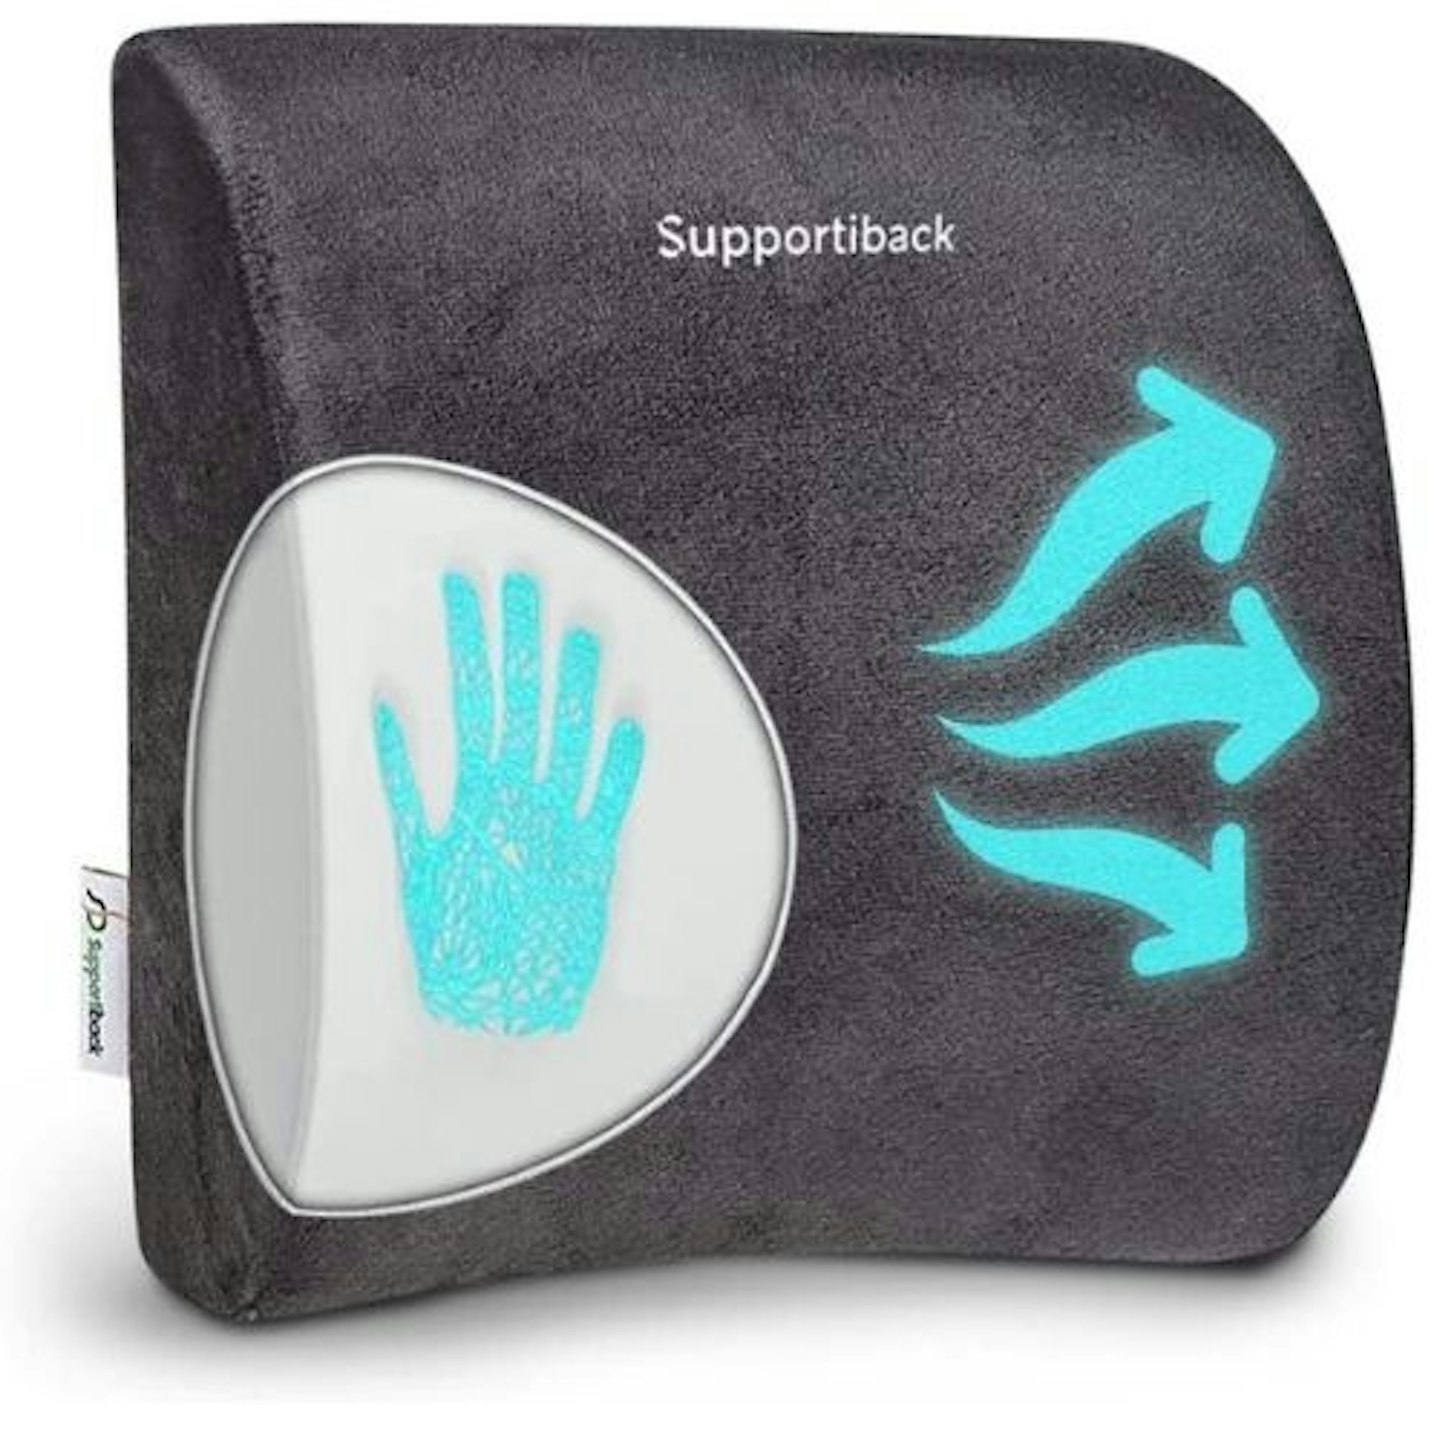 Supportiback-Posture-Therapy-Lumbar-Support-Cushion